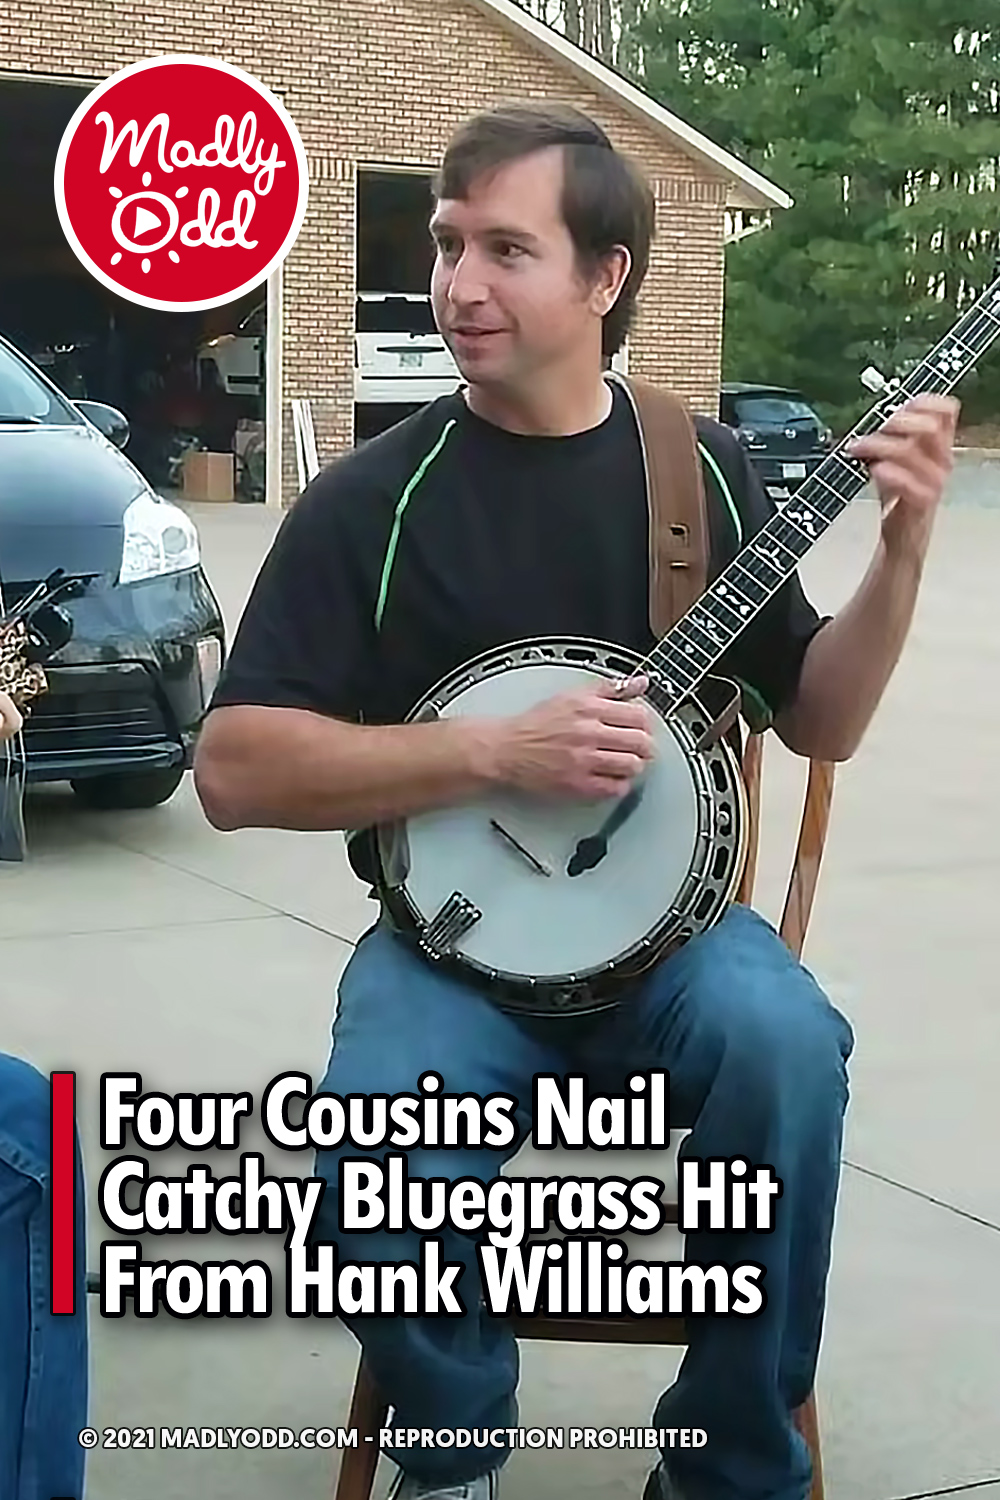 Four Cousins Nail Catchy Bluegrass Hit From Hank Williams